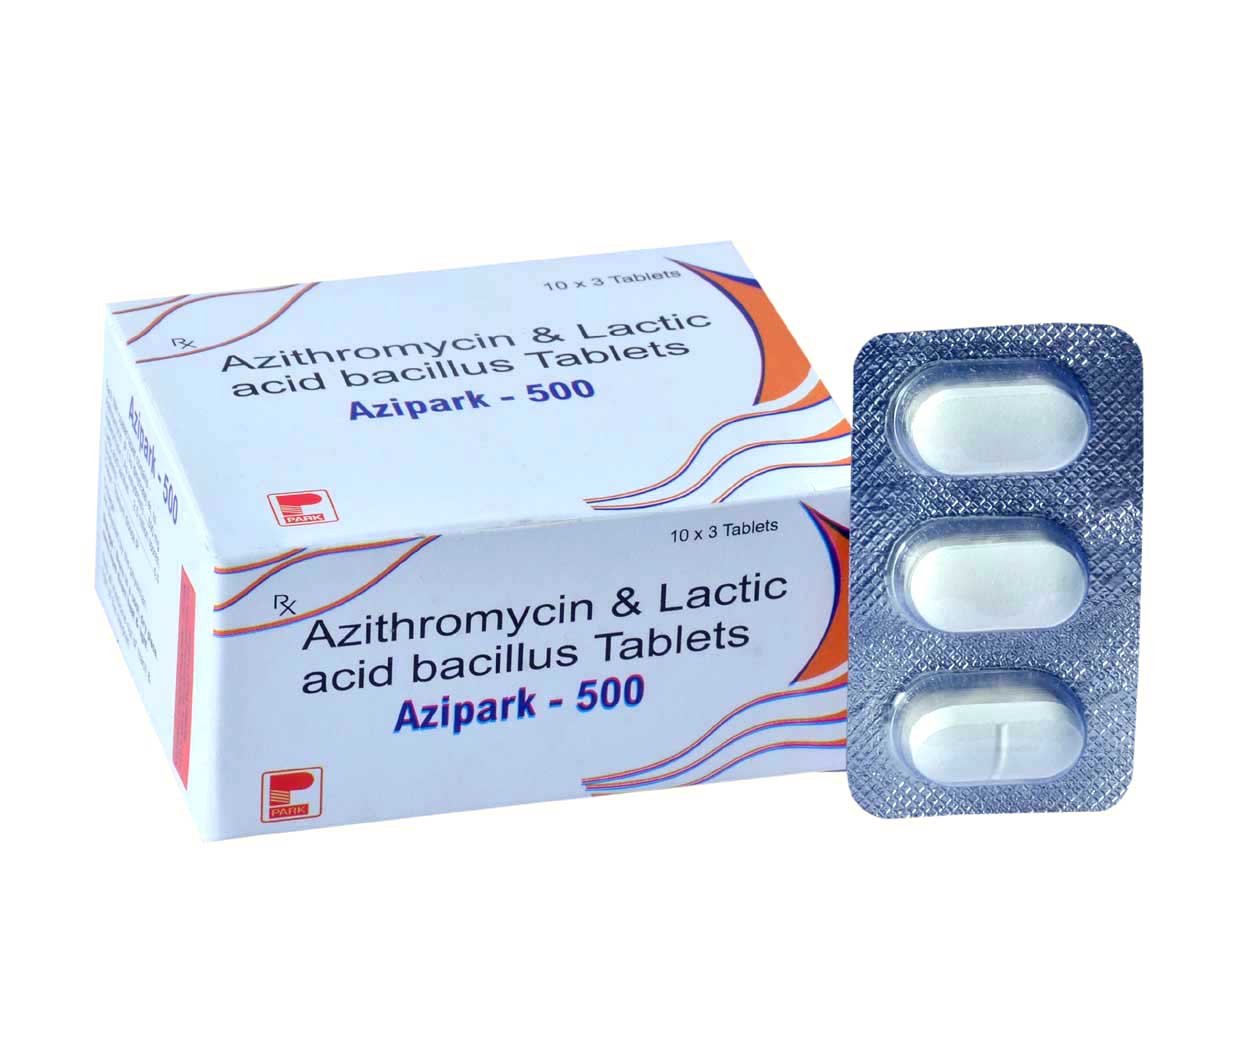 Product Name: Azipark 500, Compositions of Azipark 500 are Azithromycin & Lactic acid bacillus Tablets - Park Pharmaceuticals